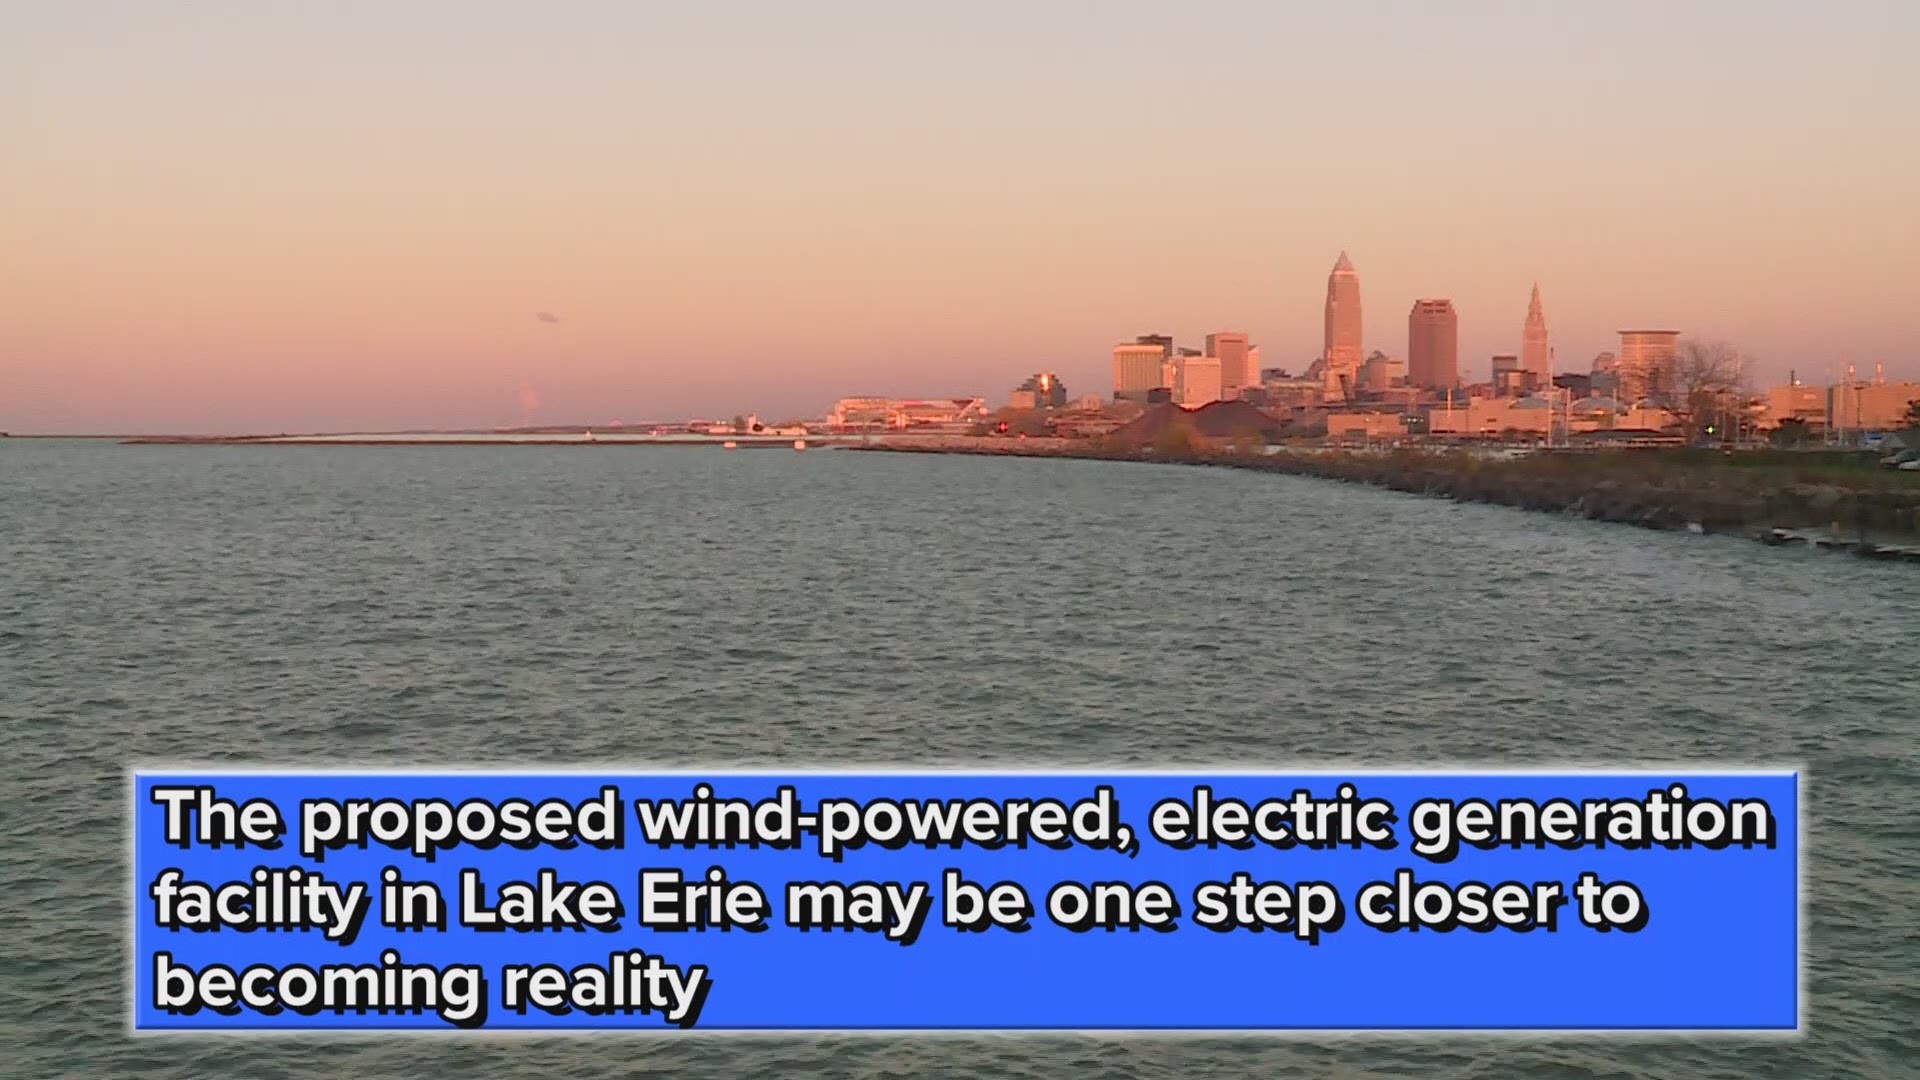 Federal report: Lake Erie wind turbine project will have 'no significant impact' to environment